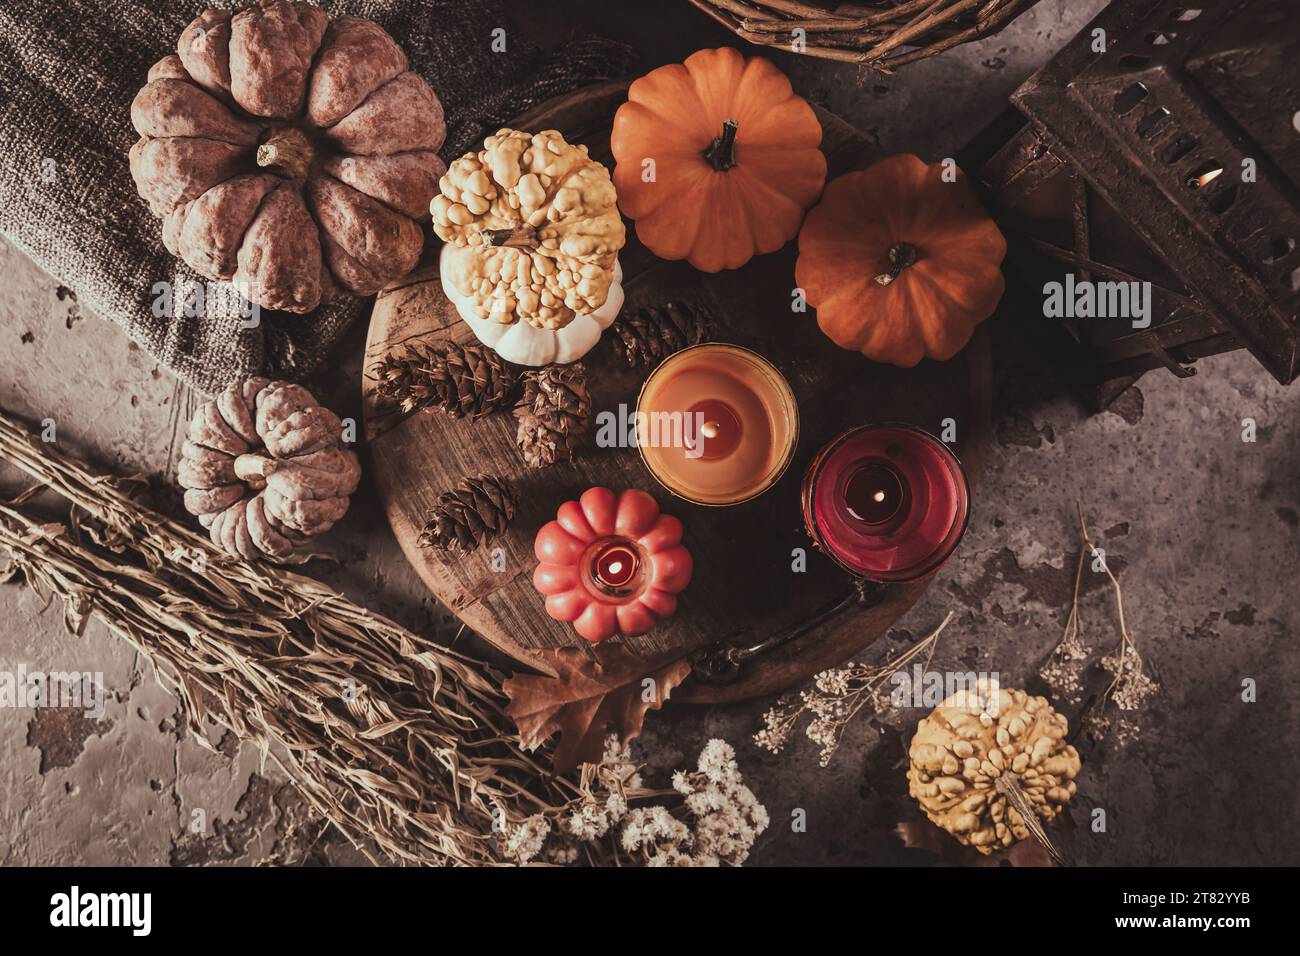 Home decoration with pumpkins and candles for Thanksgiving and Halloween Stock Photo